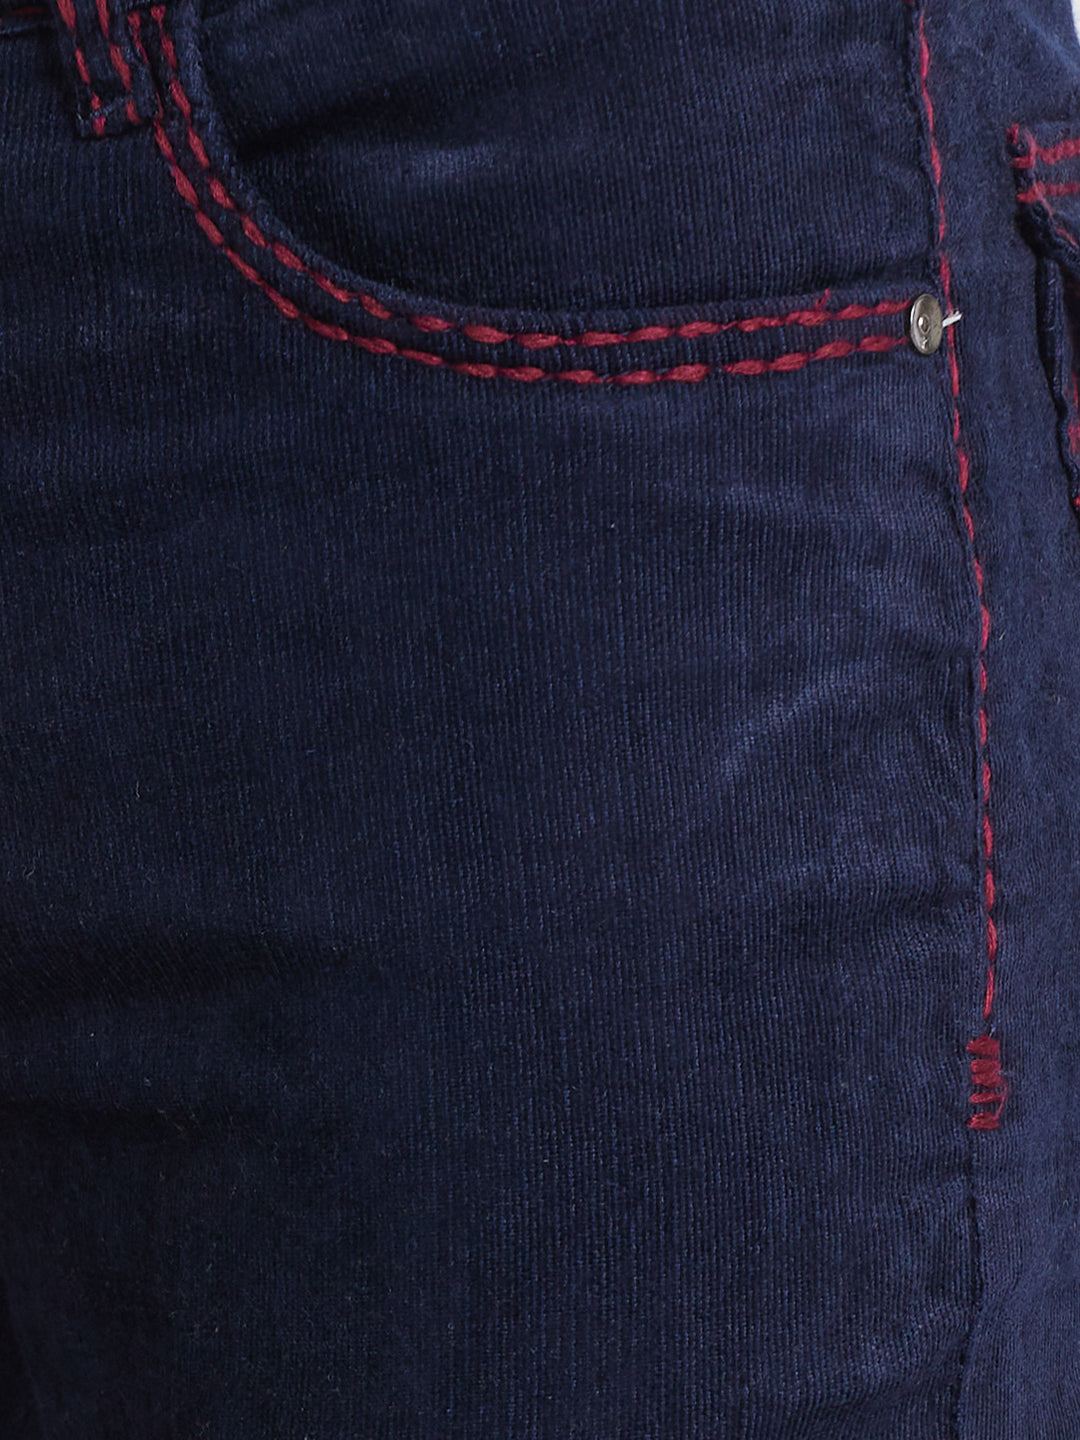 Navy Blue Bootcut Corduroy With Maroon Saddle Stitch And Bottom Zipper